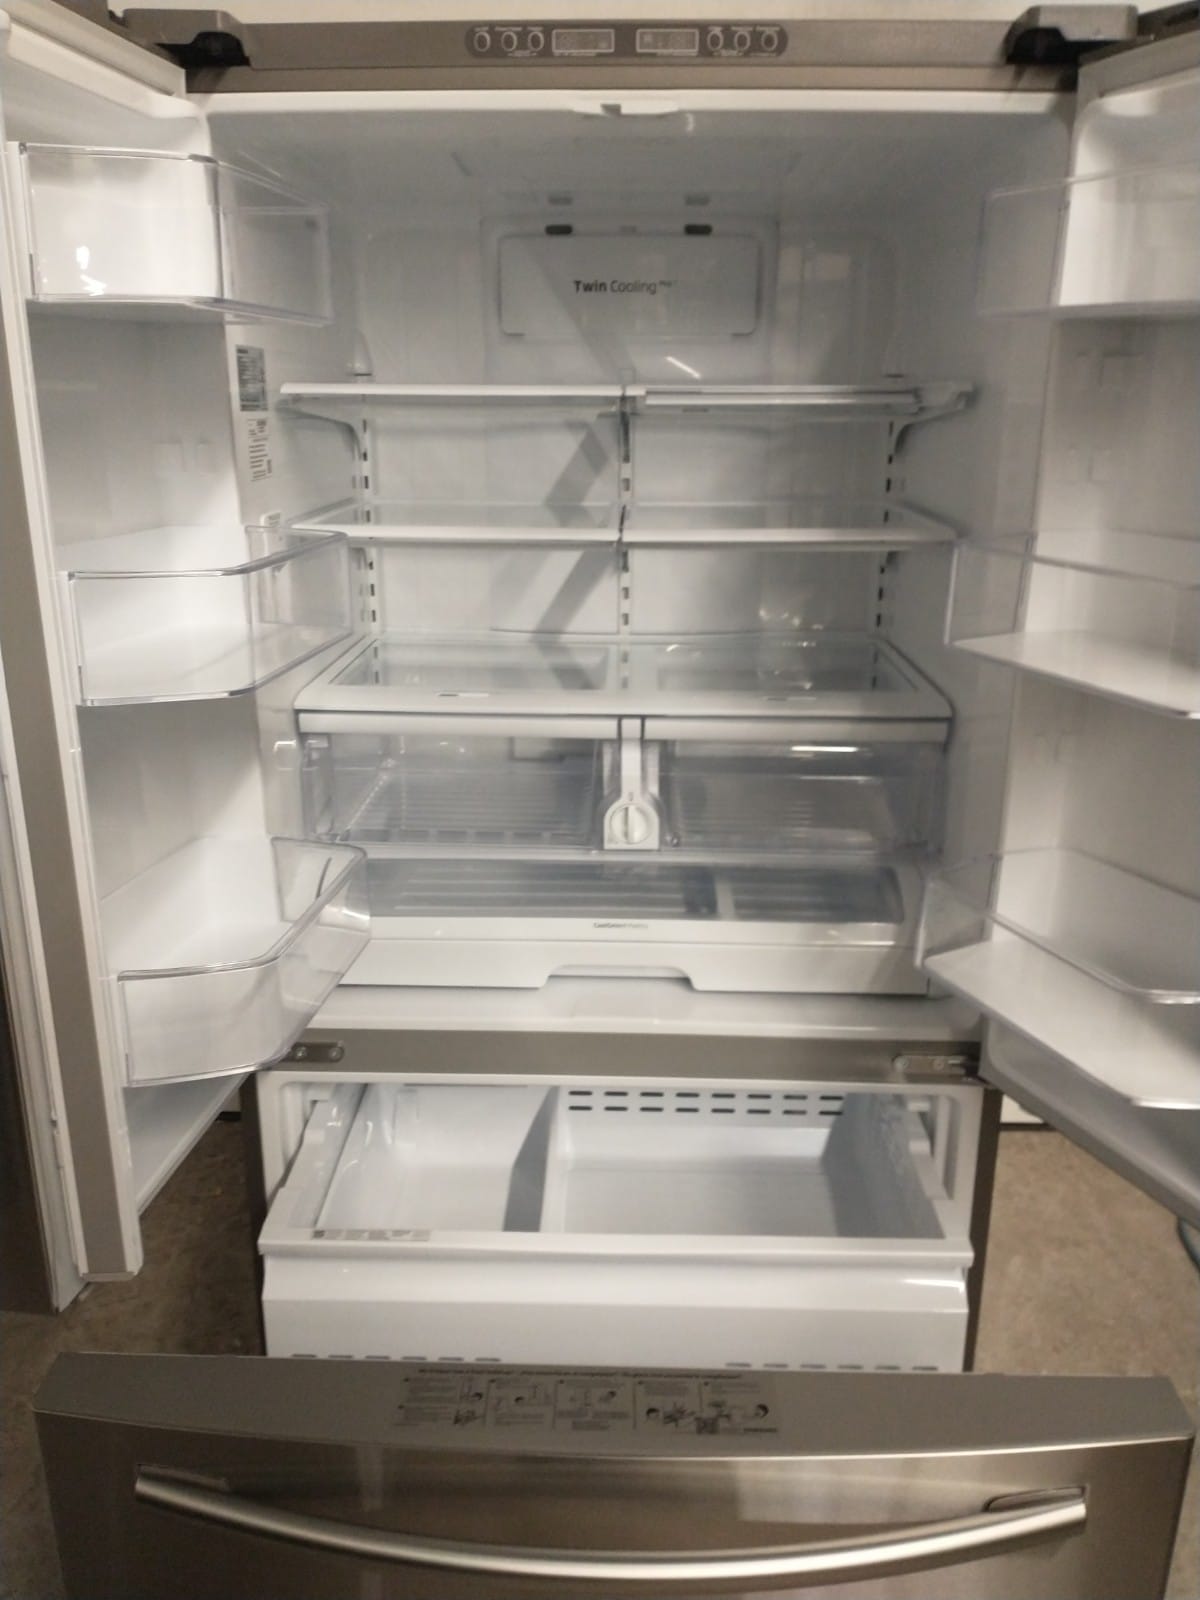 Order Your Used Refrigerator Samsung Rf26hfpnbsr/aa Today!